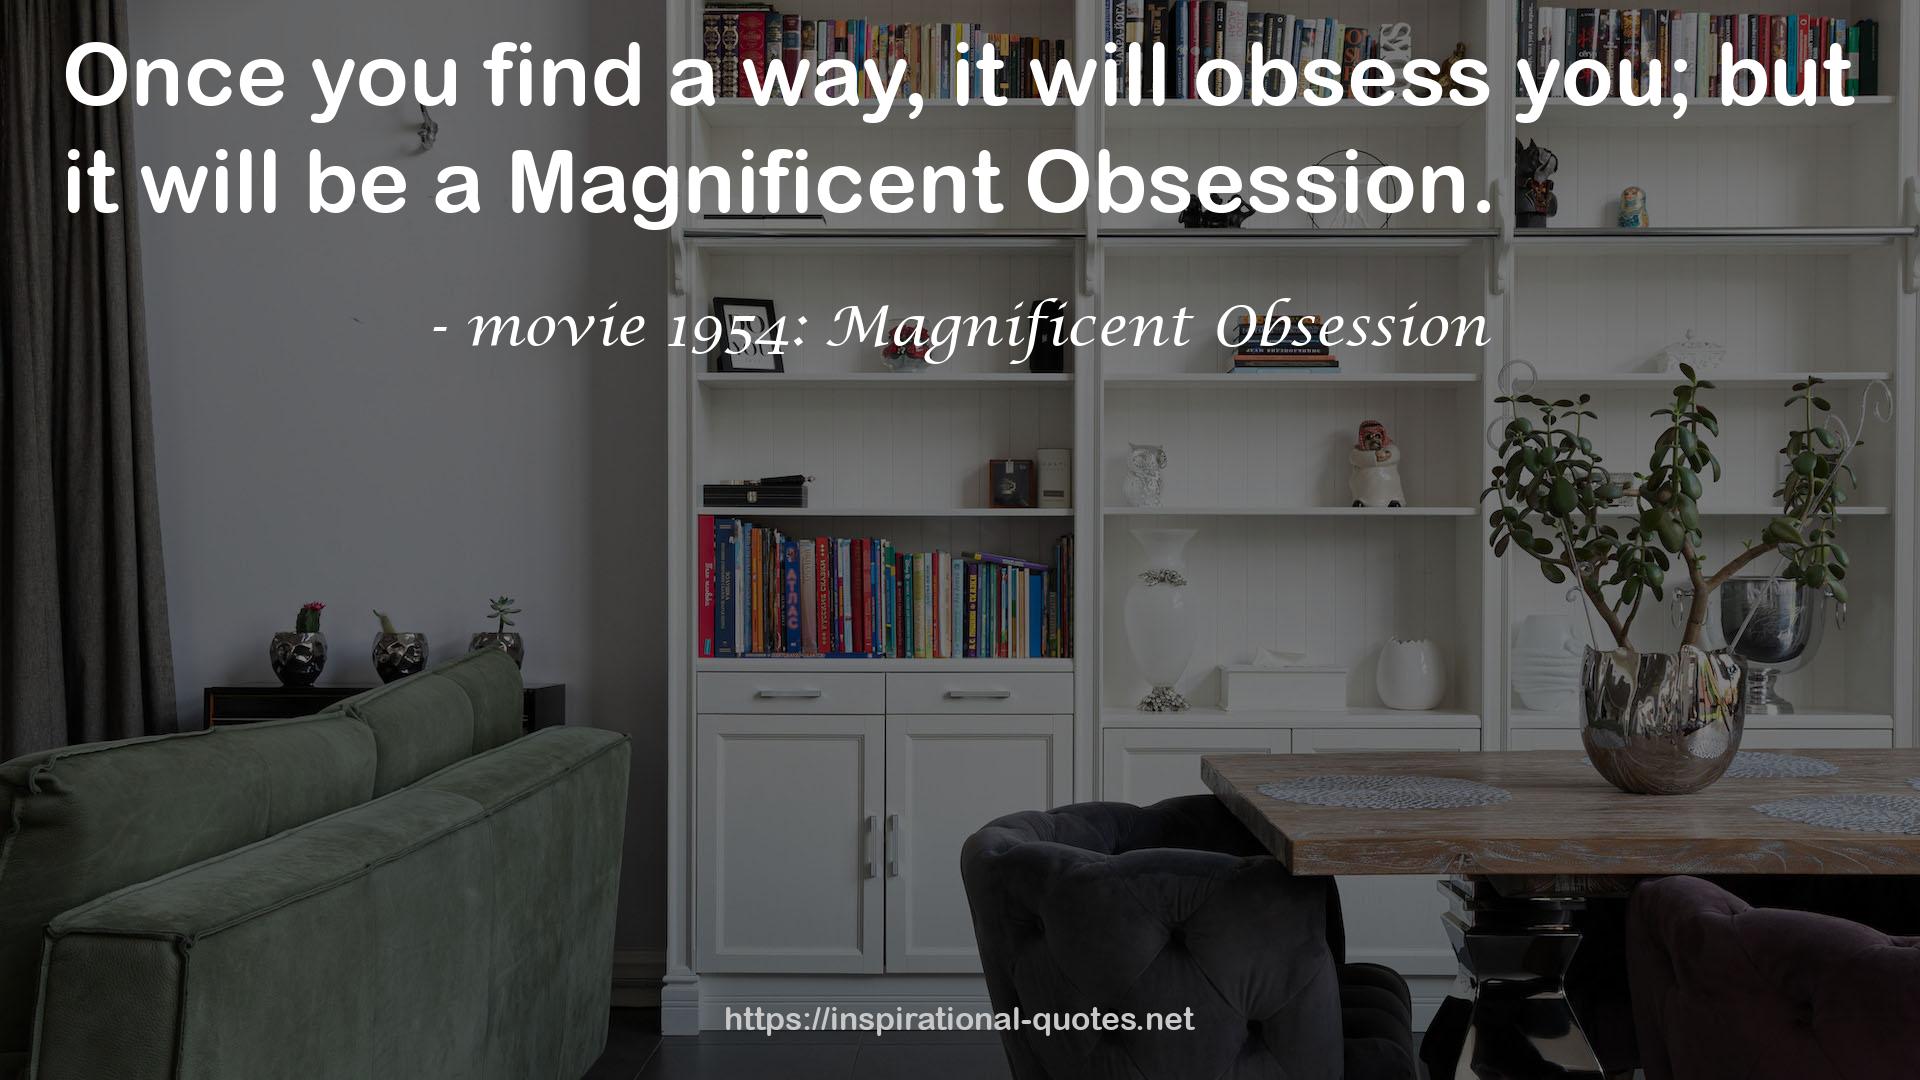 movie 1954: Magnificent Obsession QUOTES